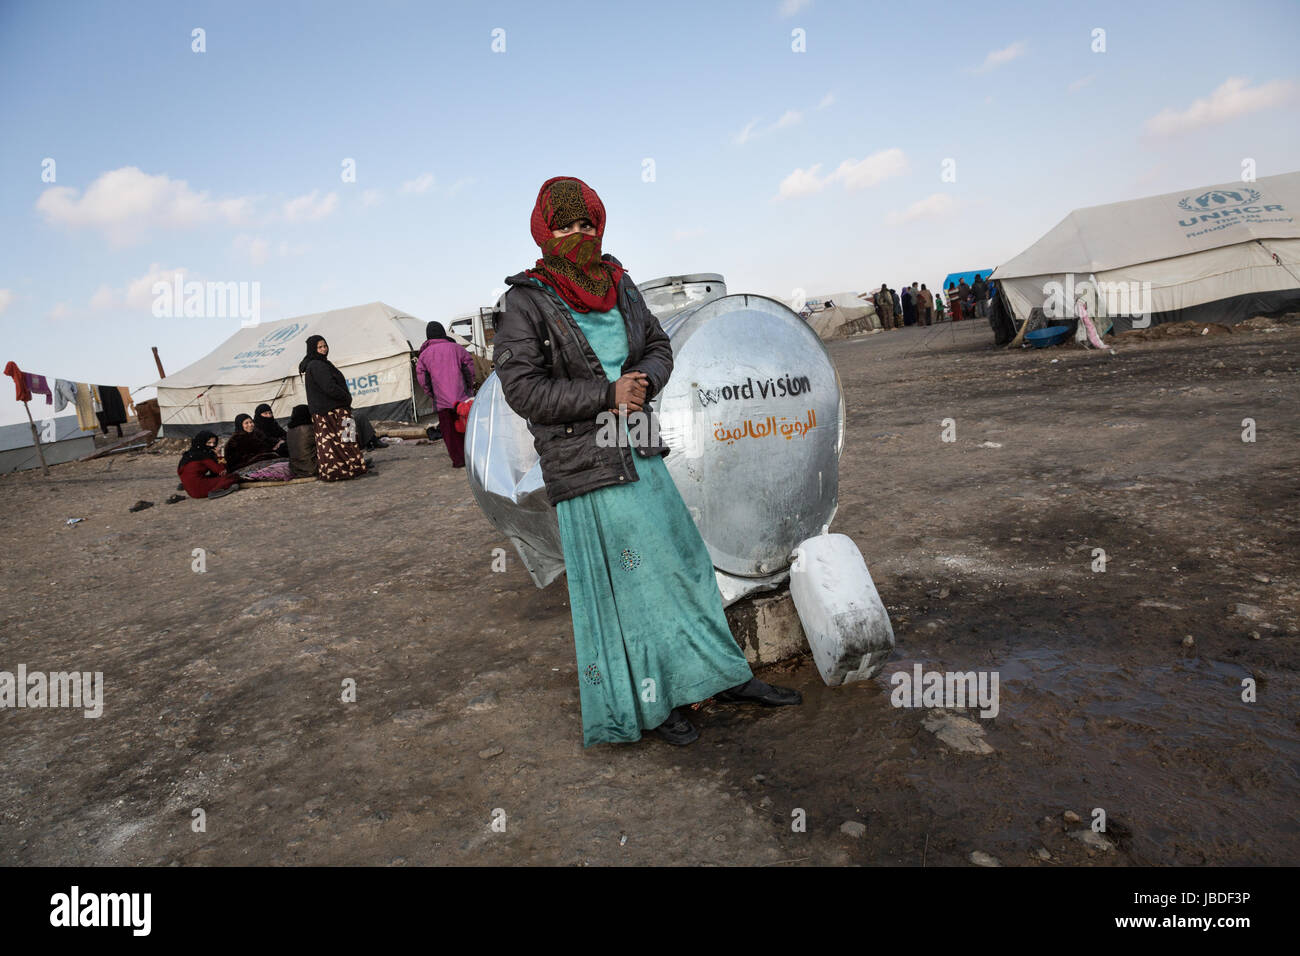 Chris Huby / Le Pictorium -  Syria / Rojava - Wrath of the Euphrates -  04/01/2017  -  Rojava  -  Syria ROJAVA / Dec16 - Jan17. Ain-Issa refugees camp. A woman is filling a pack of water. Stock Photo